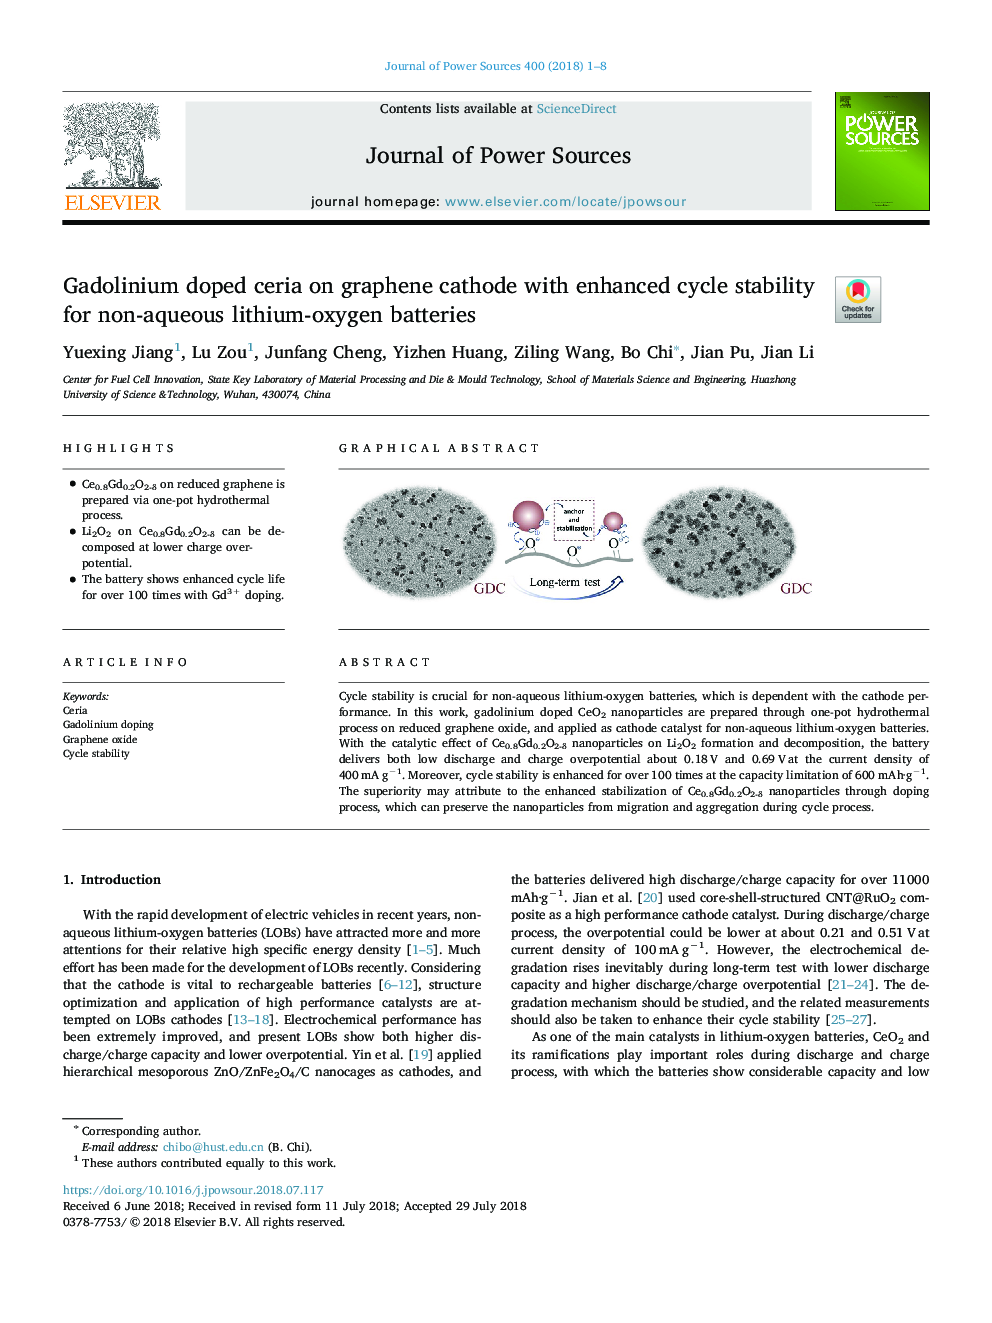 Gadolinium doped ceria on graphene cathode with enhanced cycle stability for non-aqueous lithium-oxygen batteries